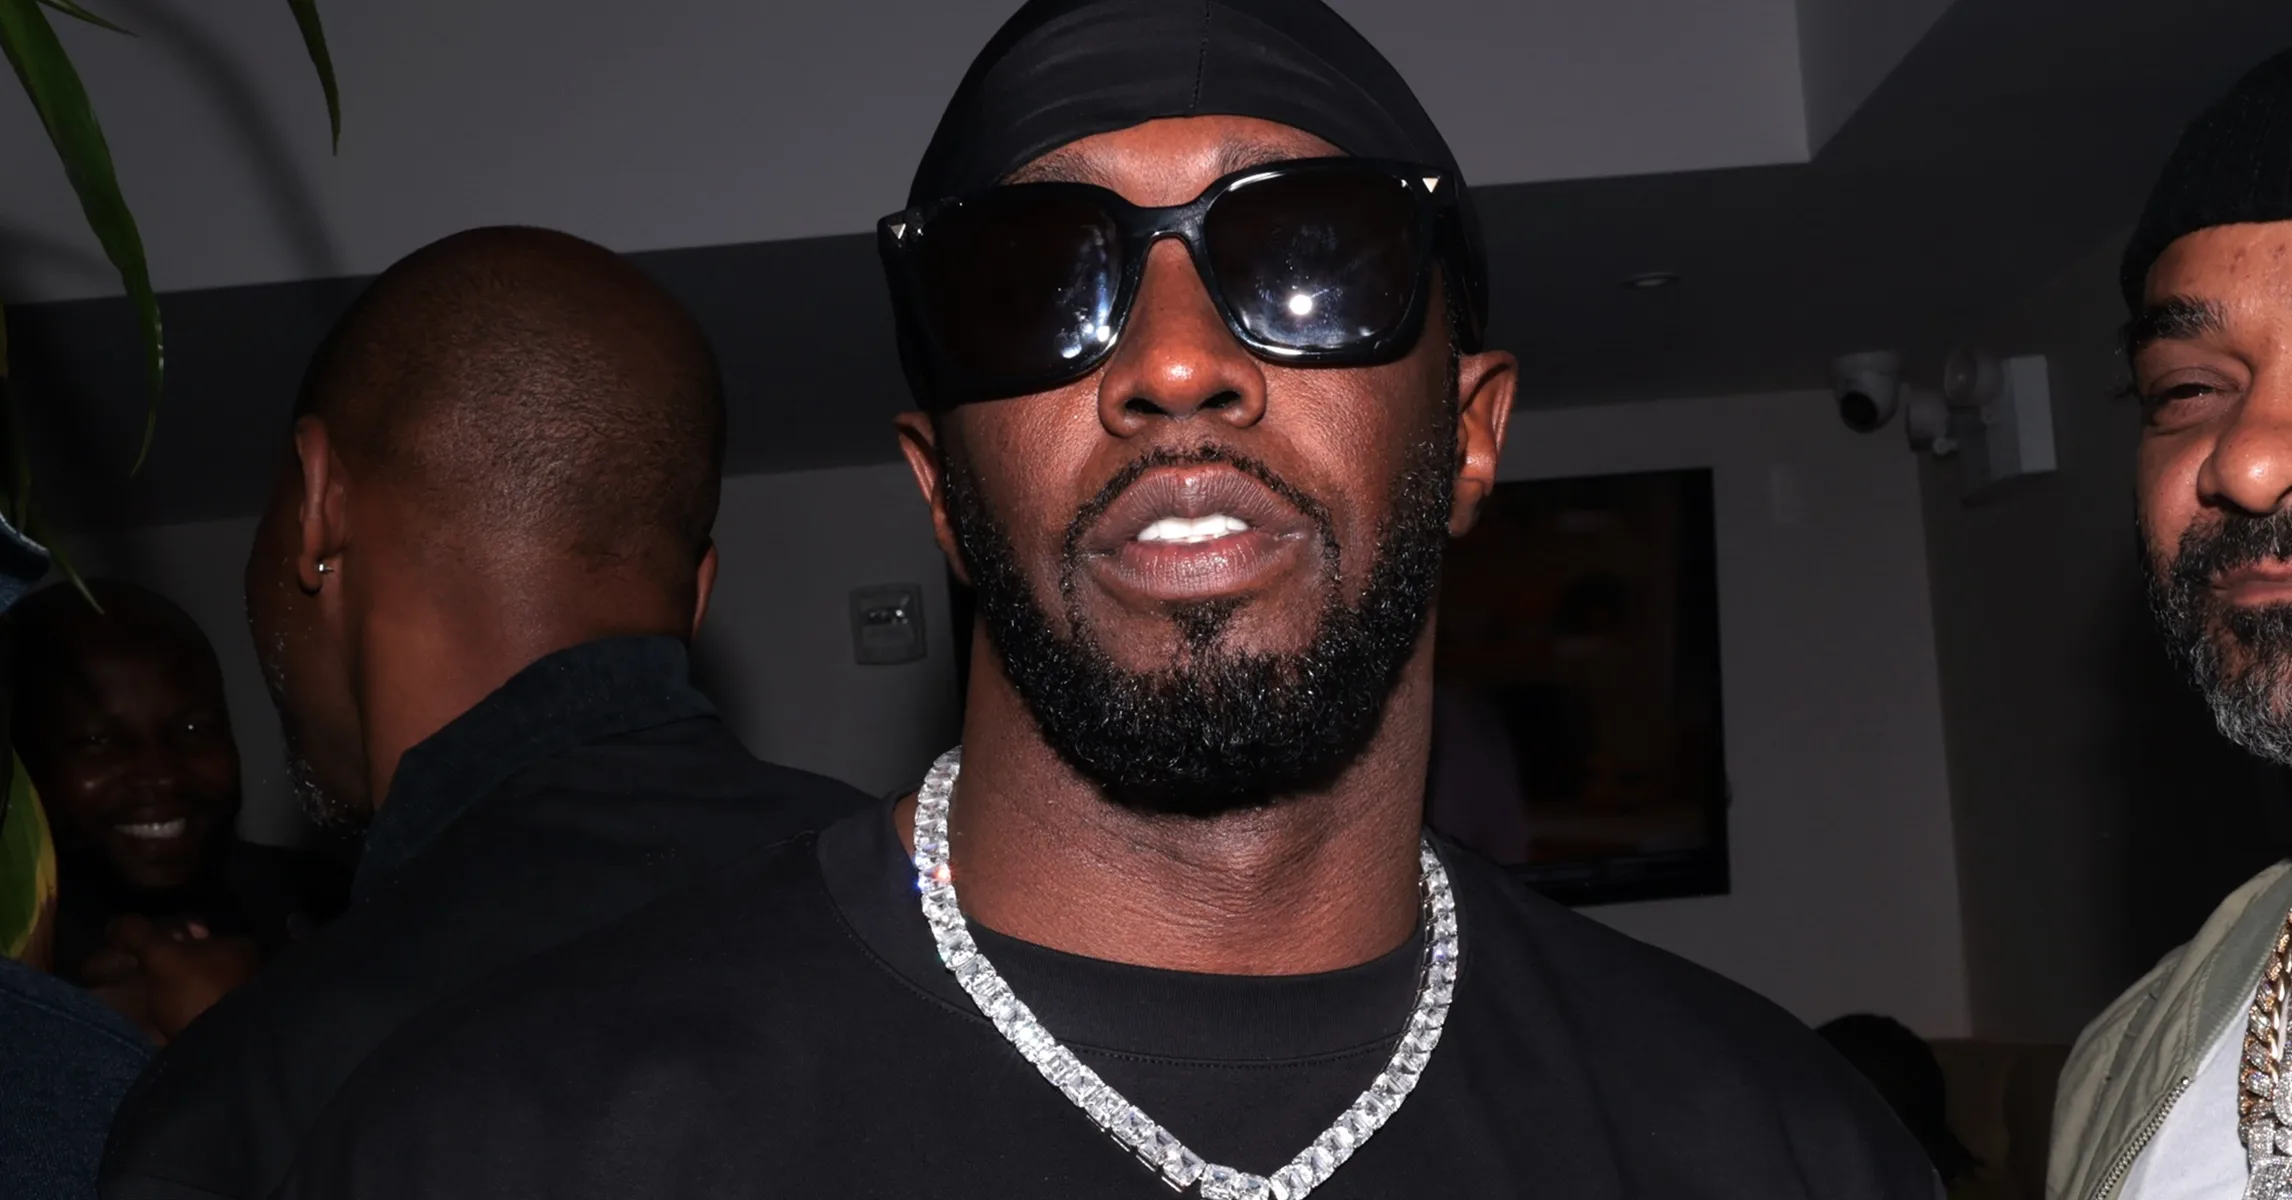 Diddy's Ex-Bodyguard Claims His Secret Tapes Could Feature Politicians, Preachers, And Princes